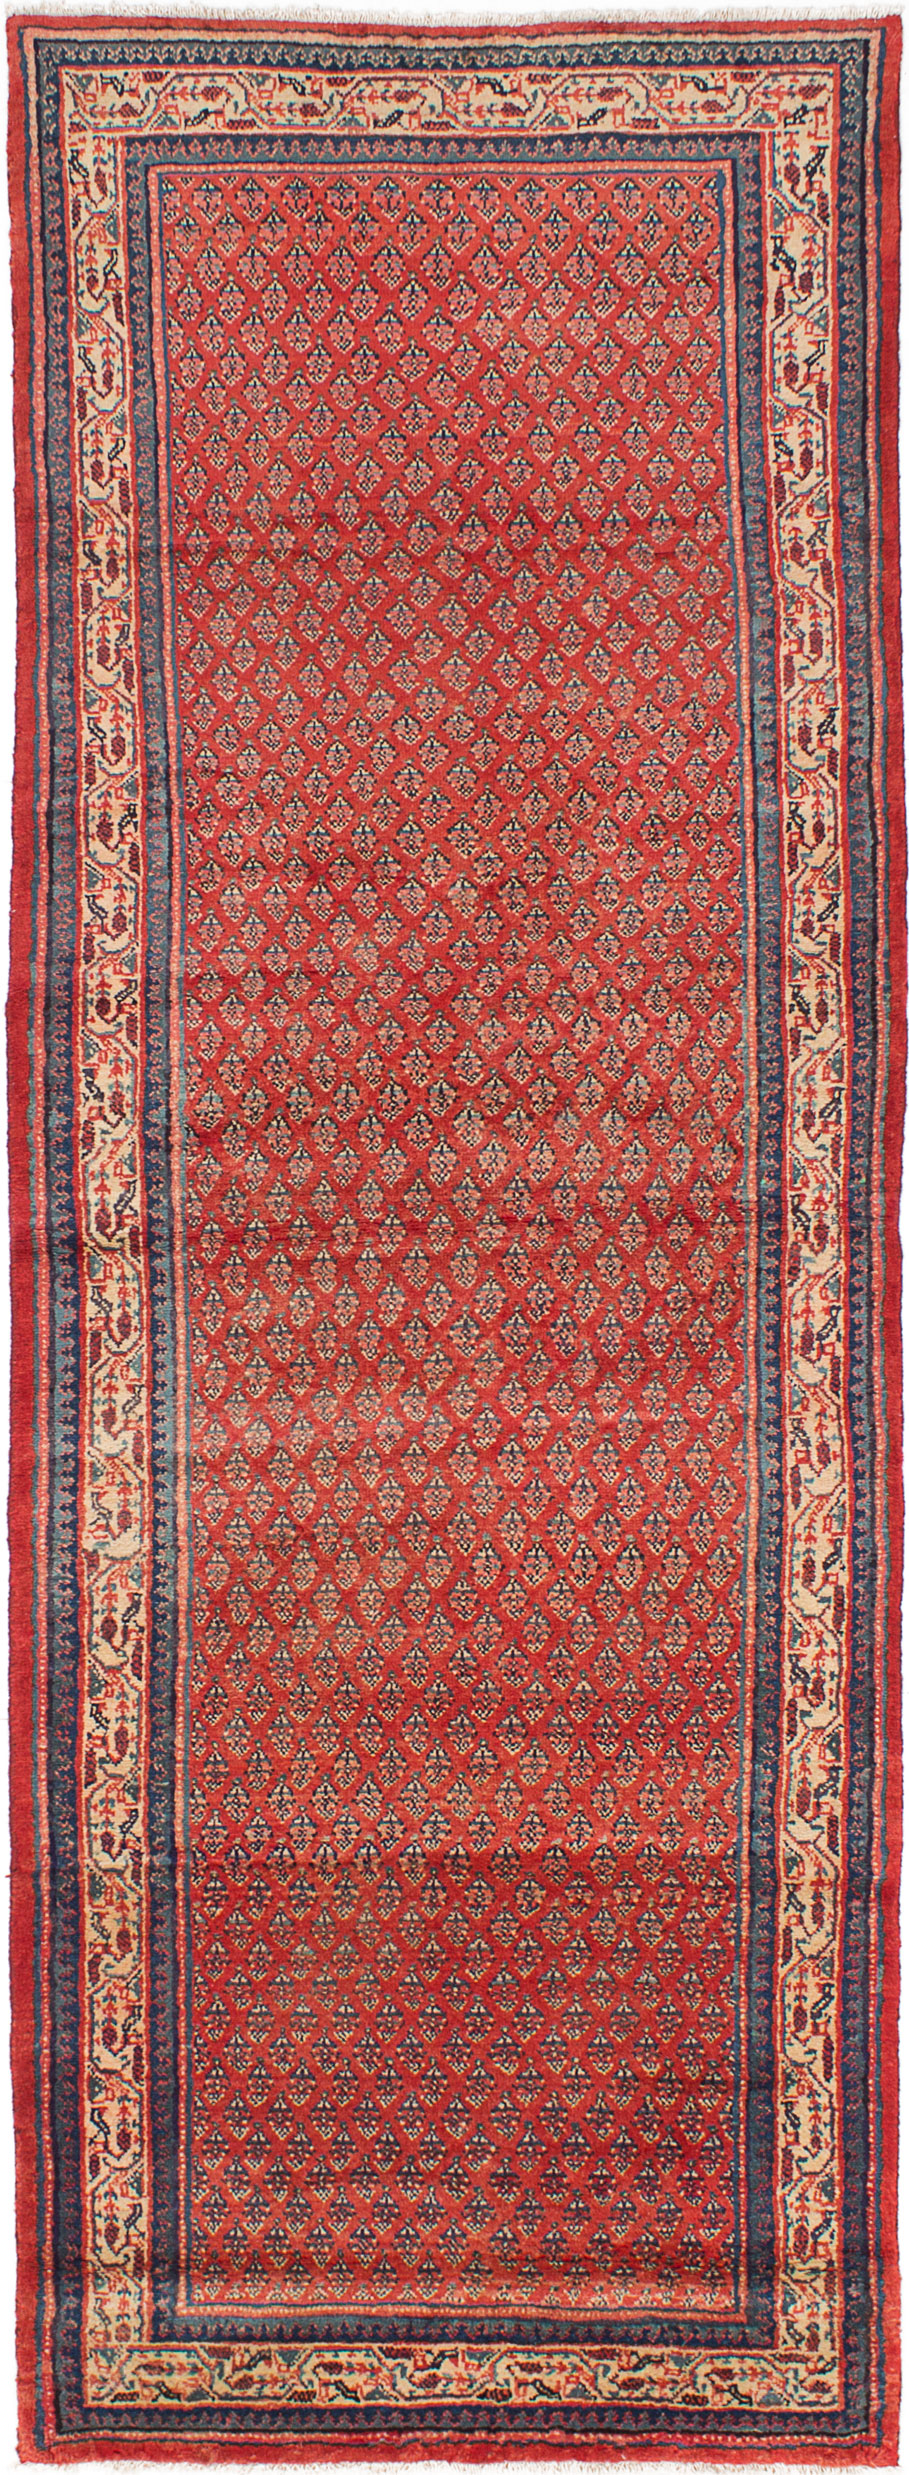 Hand-knotted Arak Red Wool Rug 3'9" x 10'7" Size: 3'9" x 10'7"  